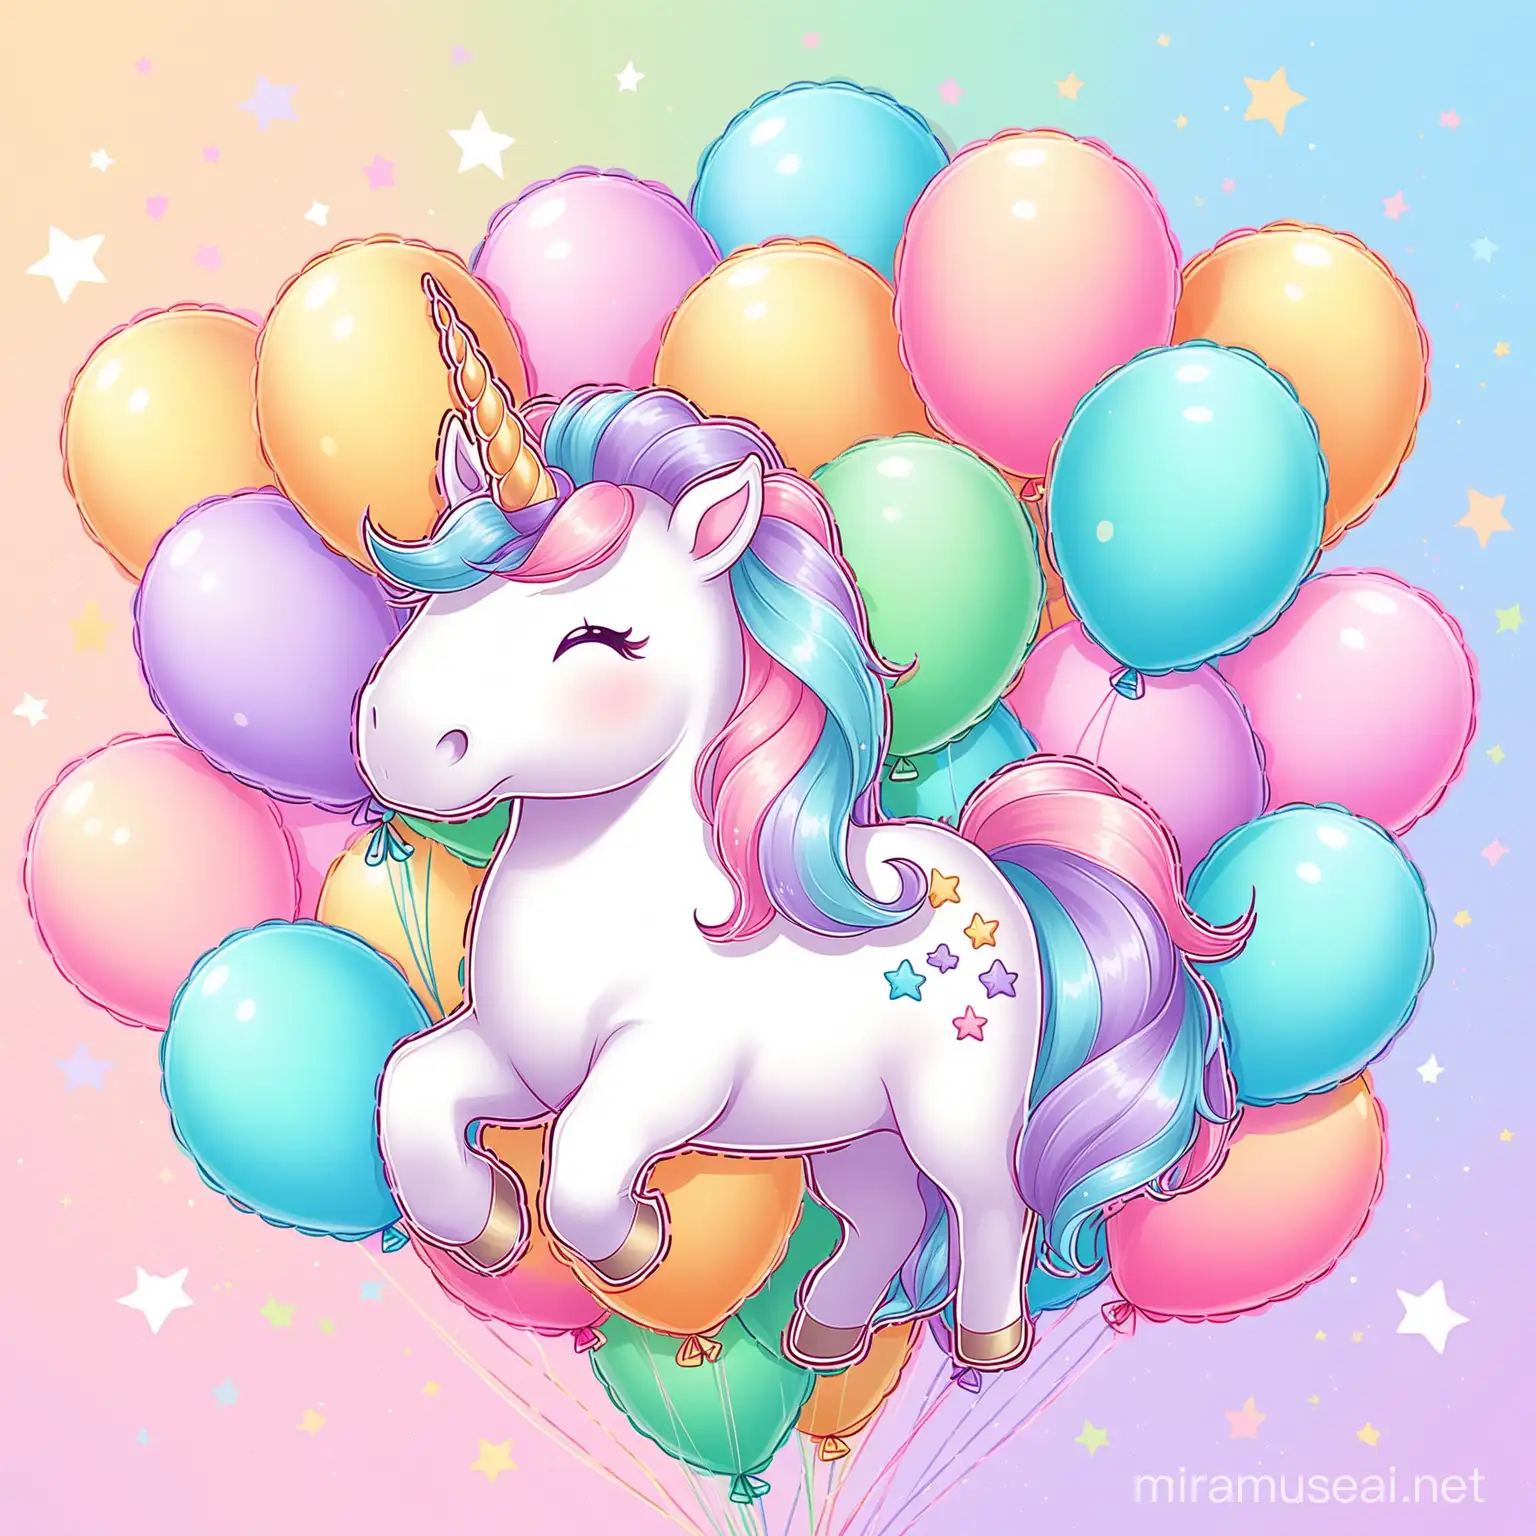 pastel image of a cute unicorn holding 11 balloons of different colors